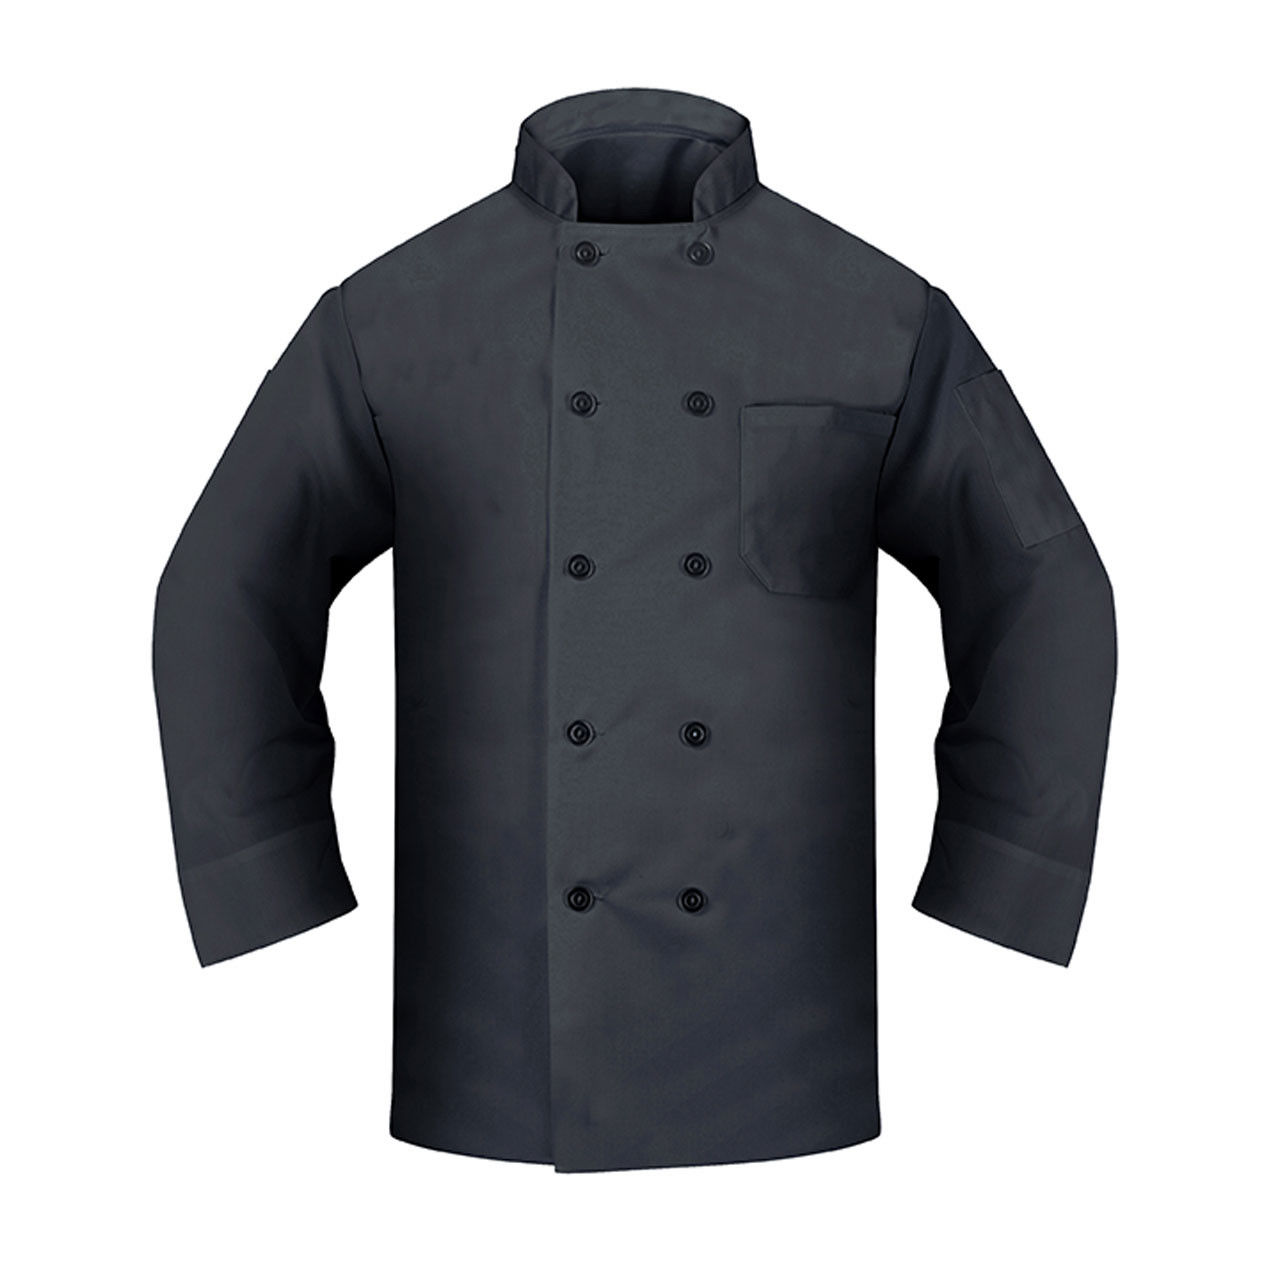 Does the black chef coat have a button or zipper closure?